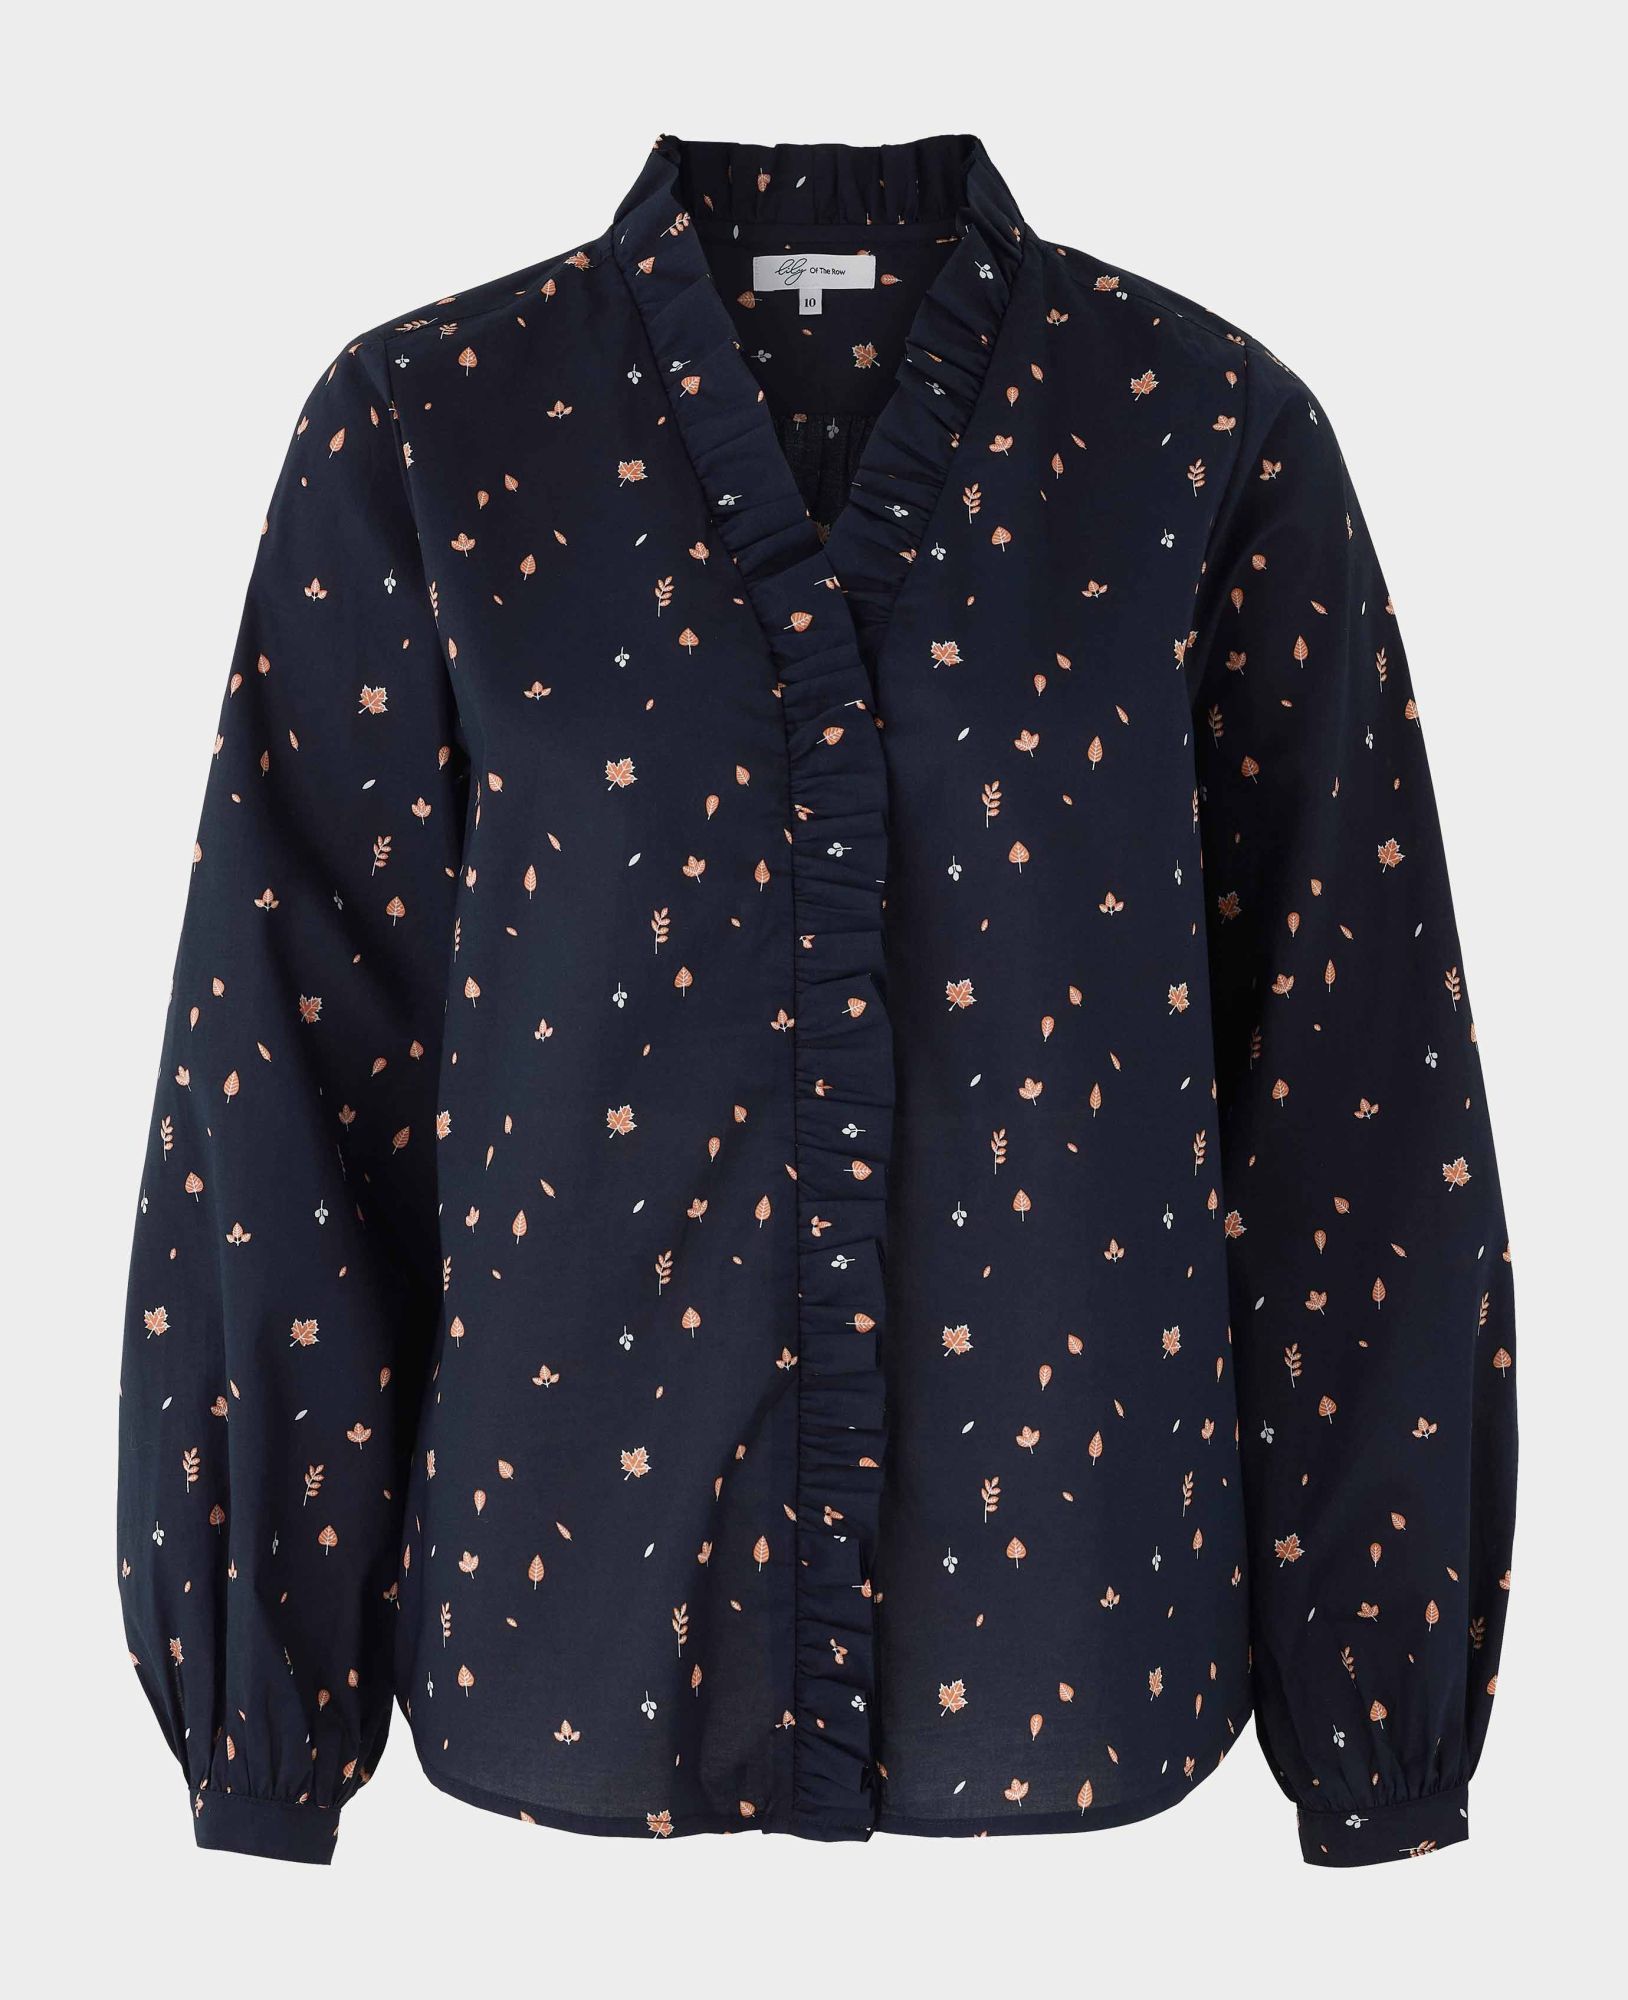 Women's Navy Leaf Print Semi Fitted Shirt 14